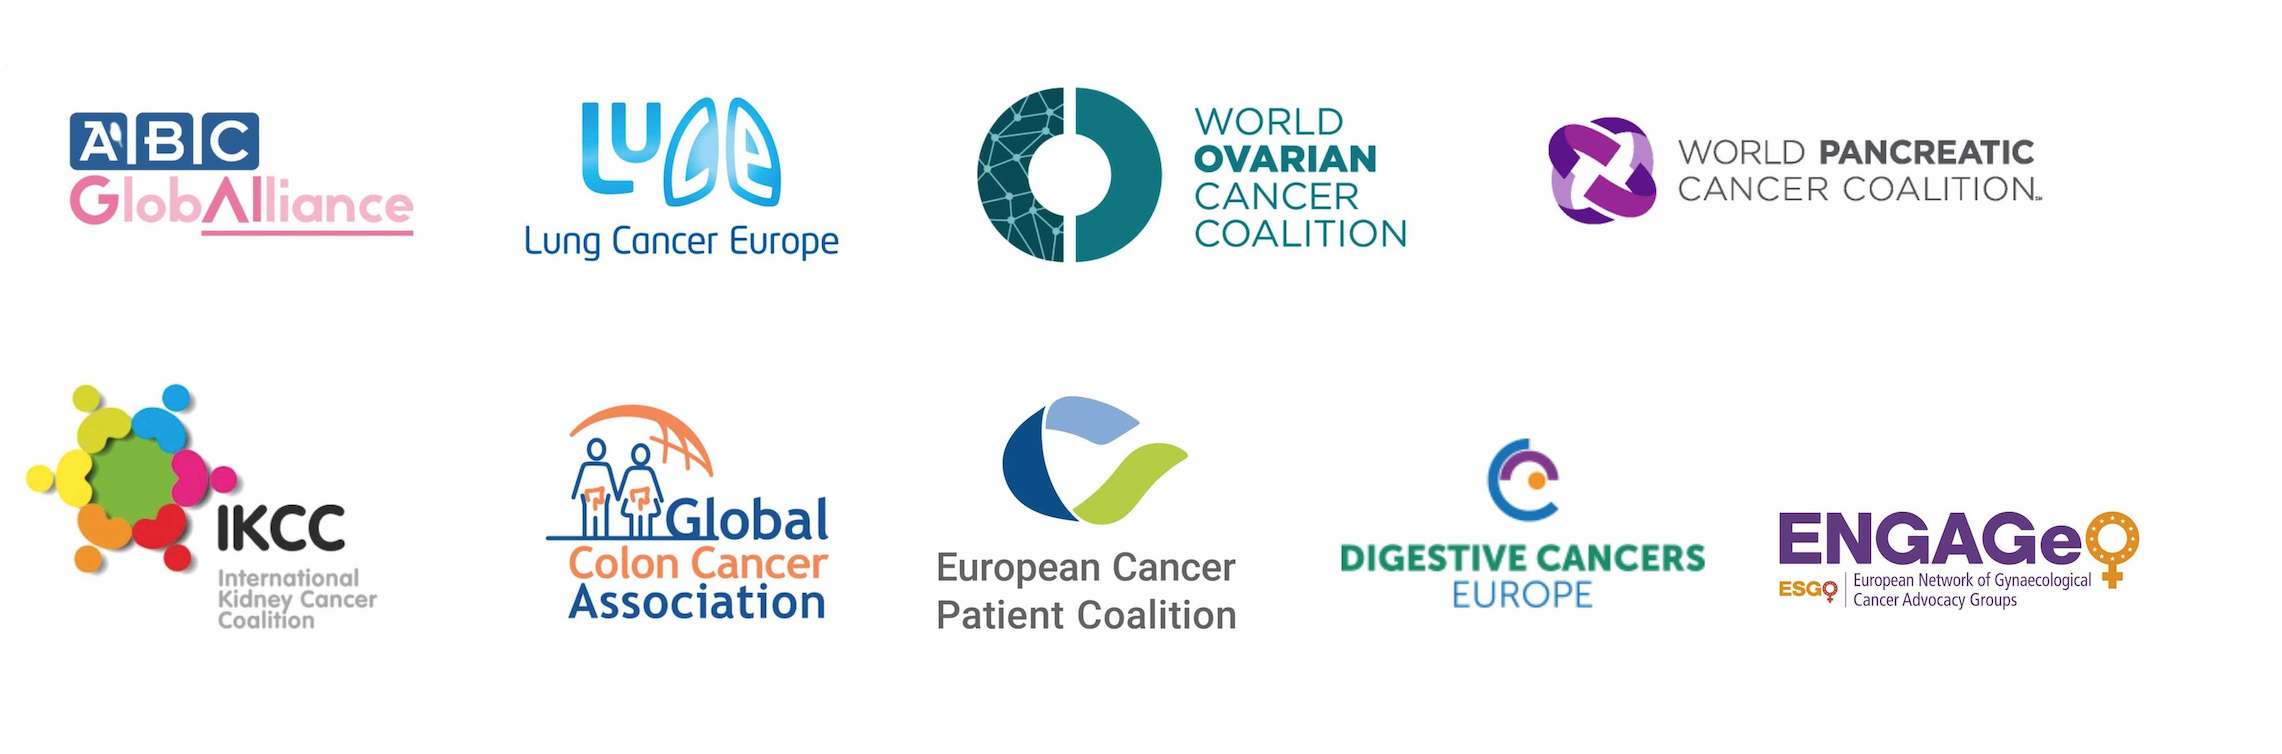 NNSC_Partners-Global alliance, Lung cancer Europe, Word ovarian, Word pancreatic, IKKC, Global coin cancer association, European cancer patient, Digestive cancer, ENGAGe